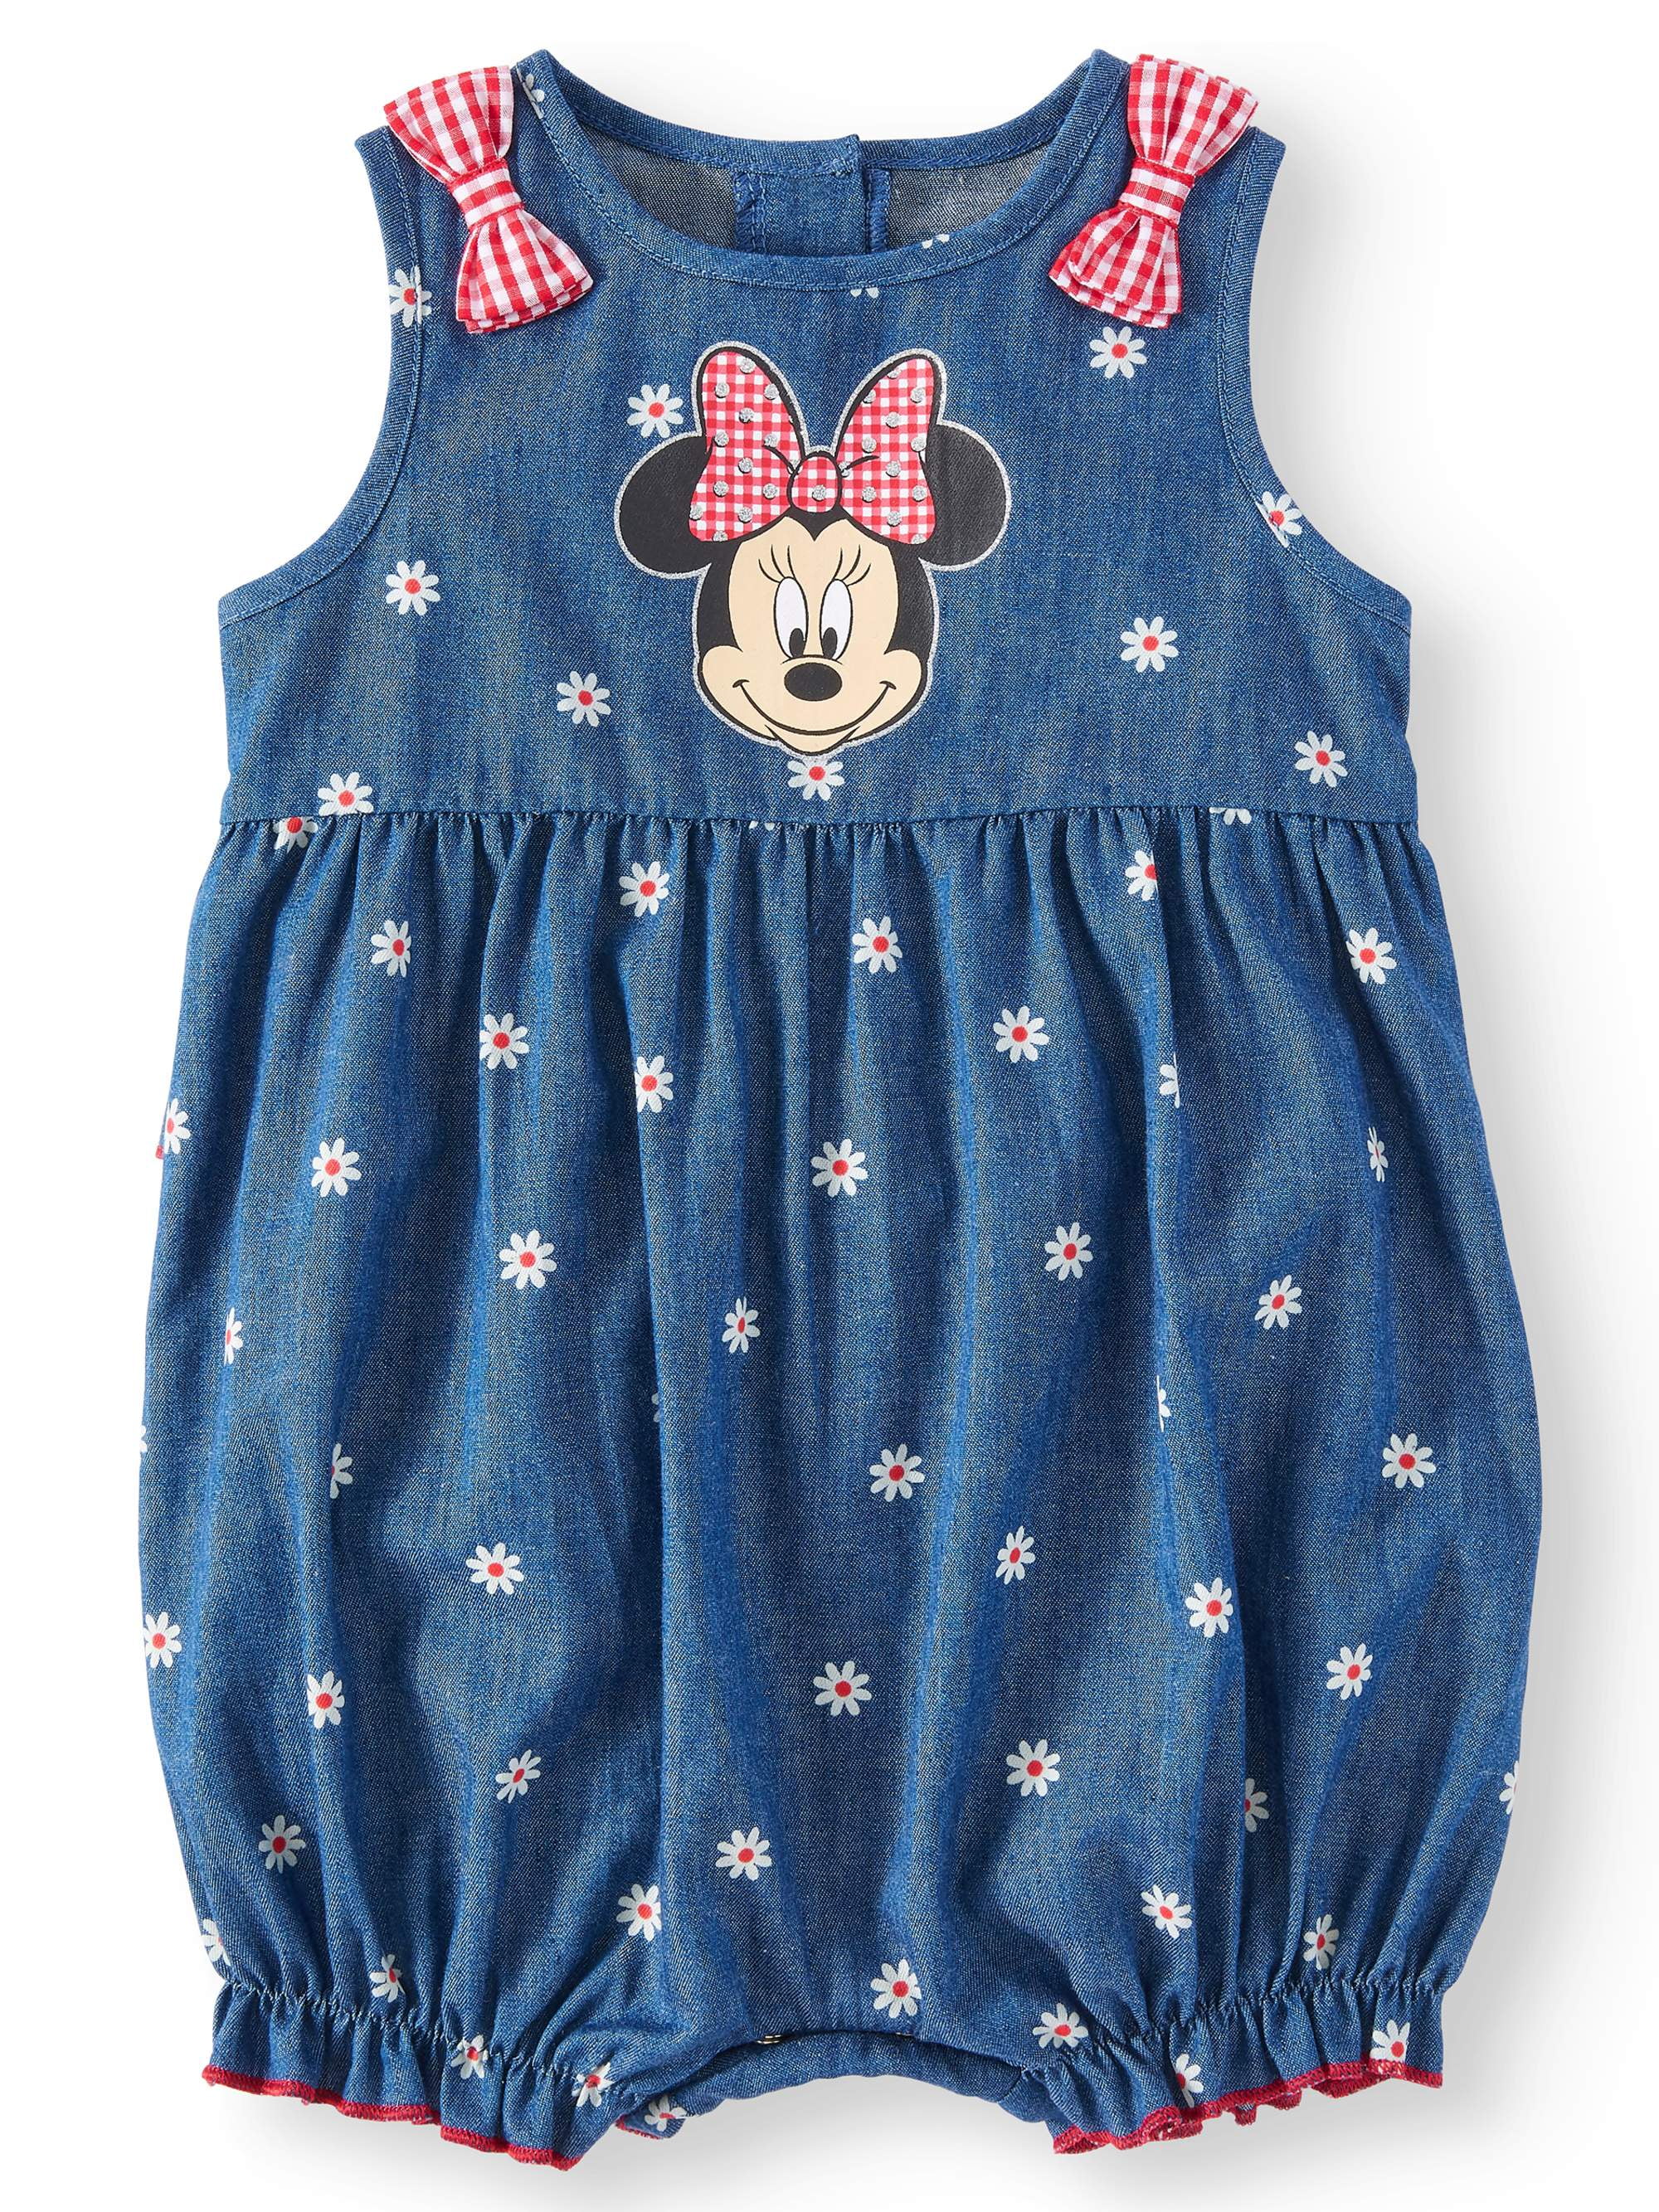 minnie mouse baby girl clothes